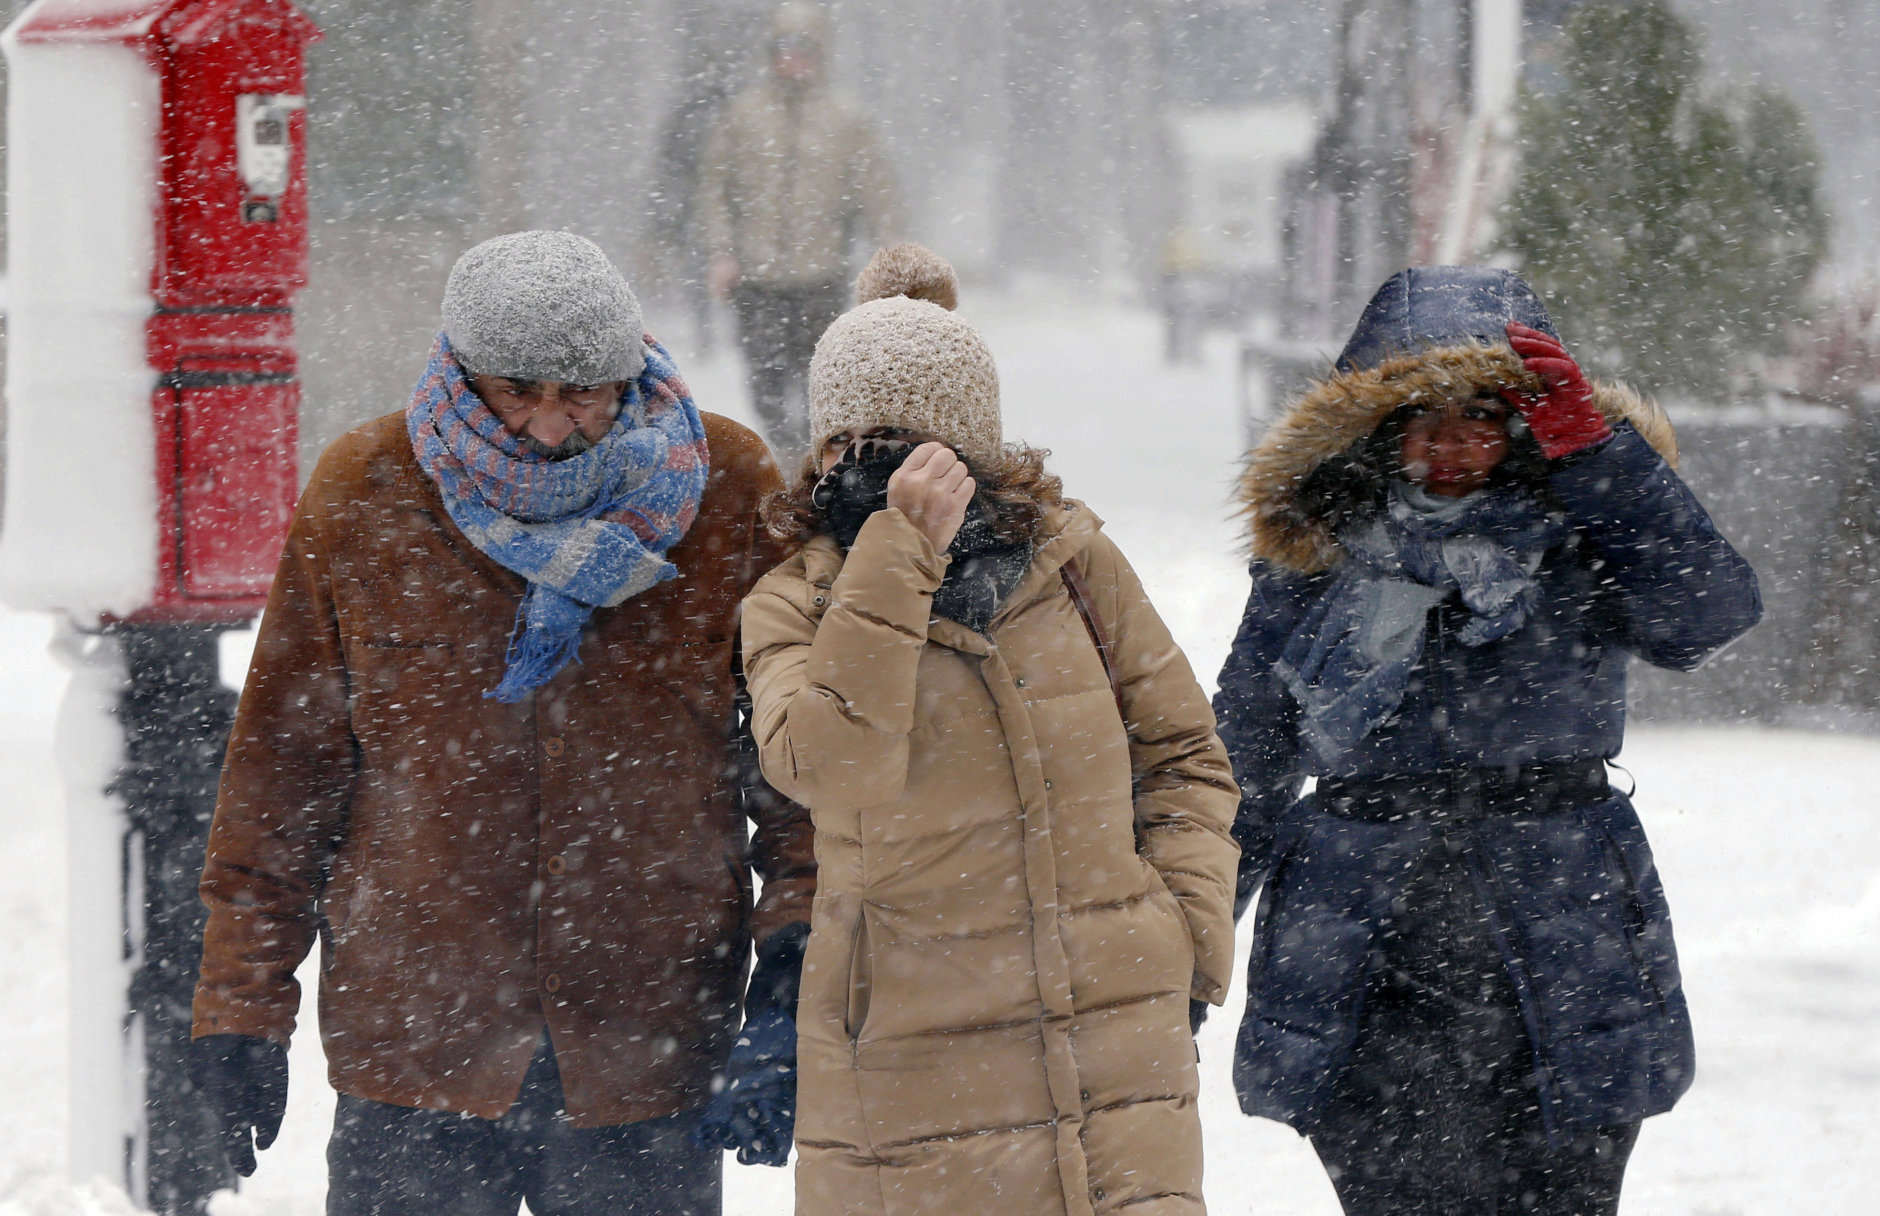 Pedestrians make their way through blowing snow during a snowstorm, Tuesday, March 13, 2018, in Boston. (AP Photo/Michael Dwyer)